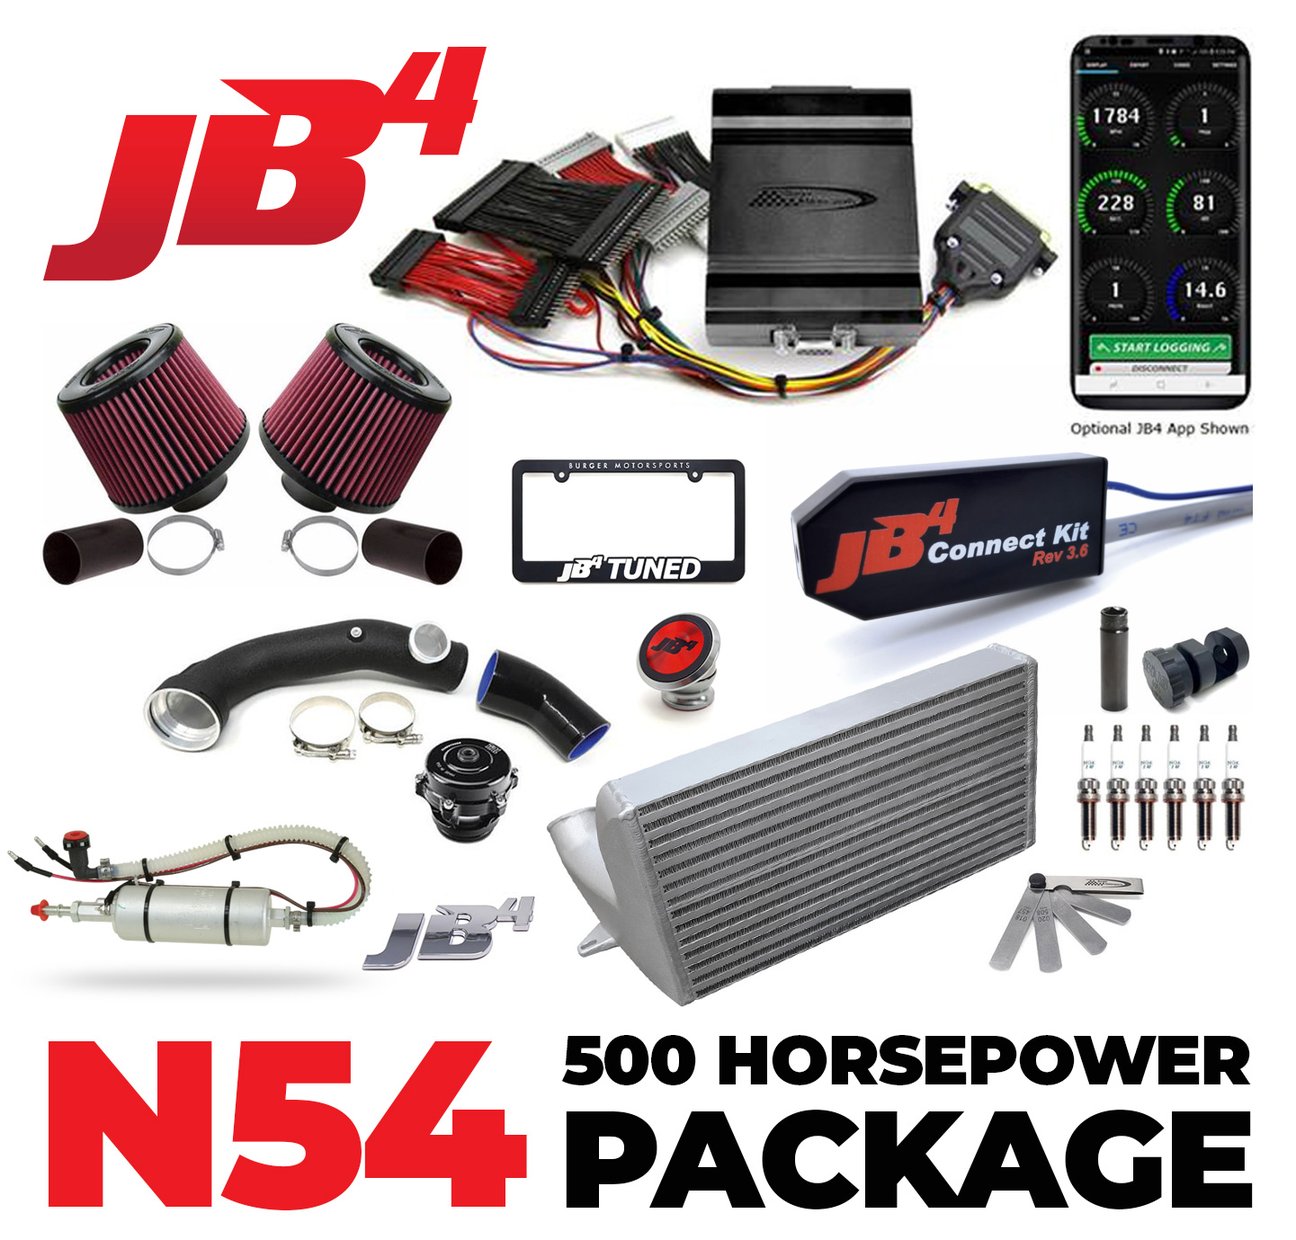 500 Horsepower Package for N54 BMW